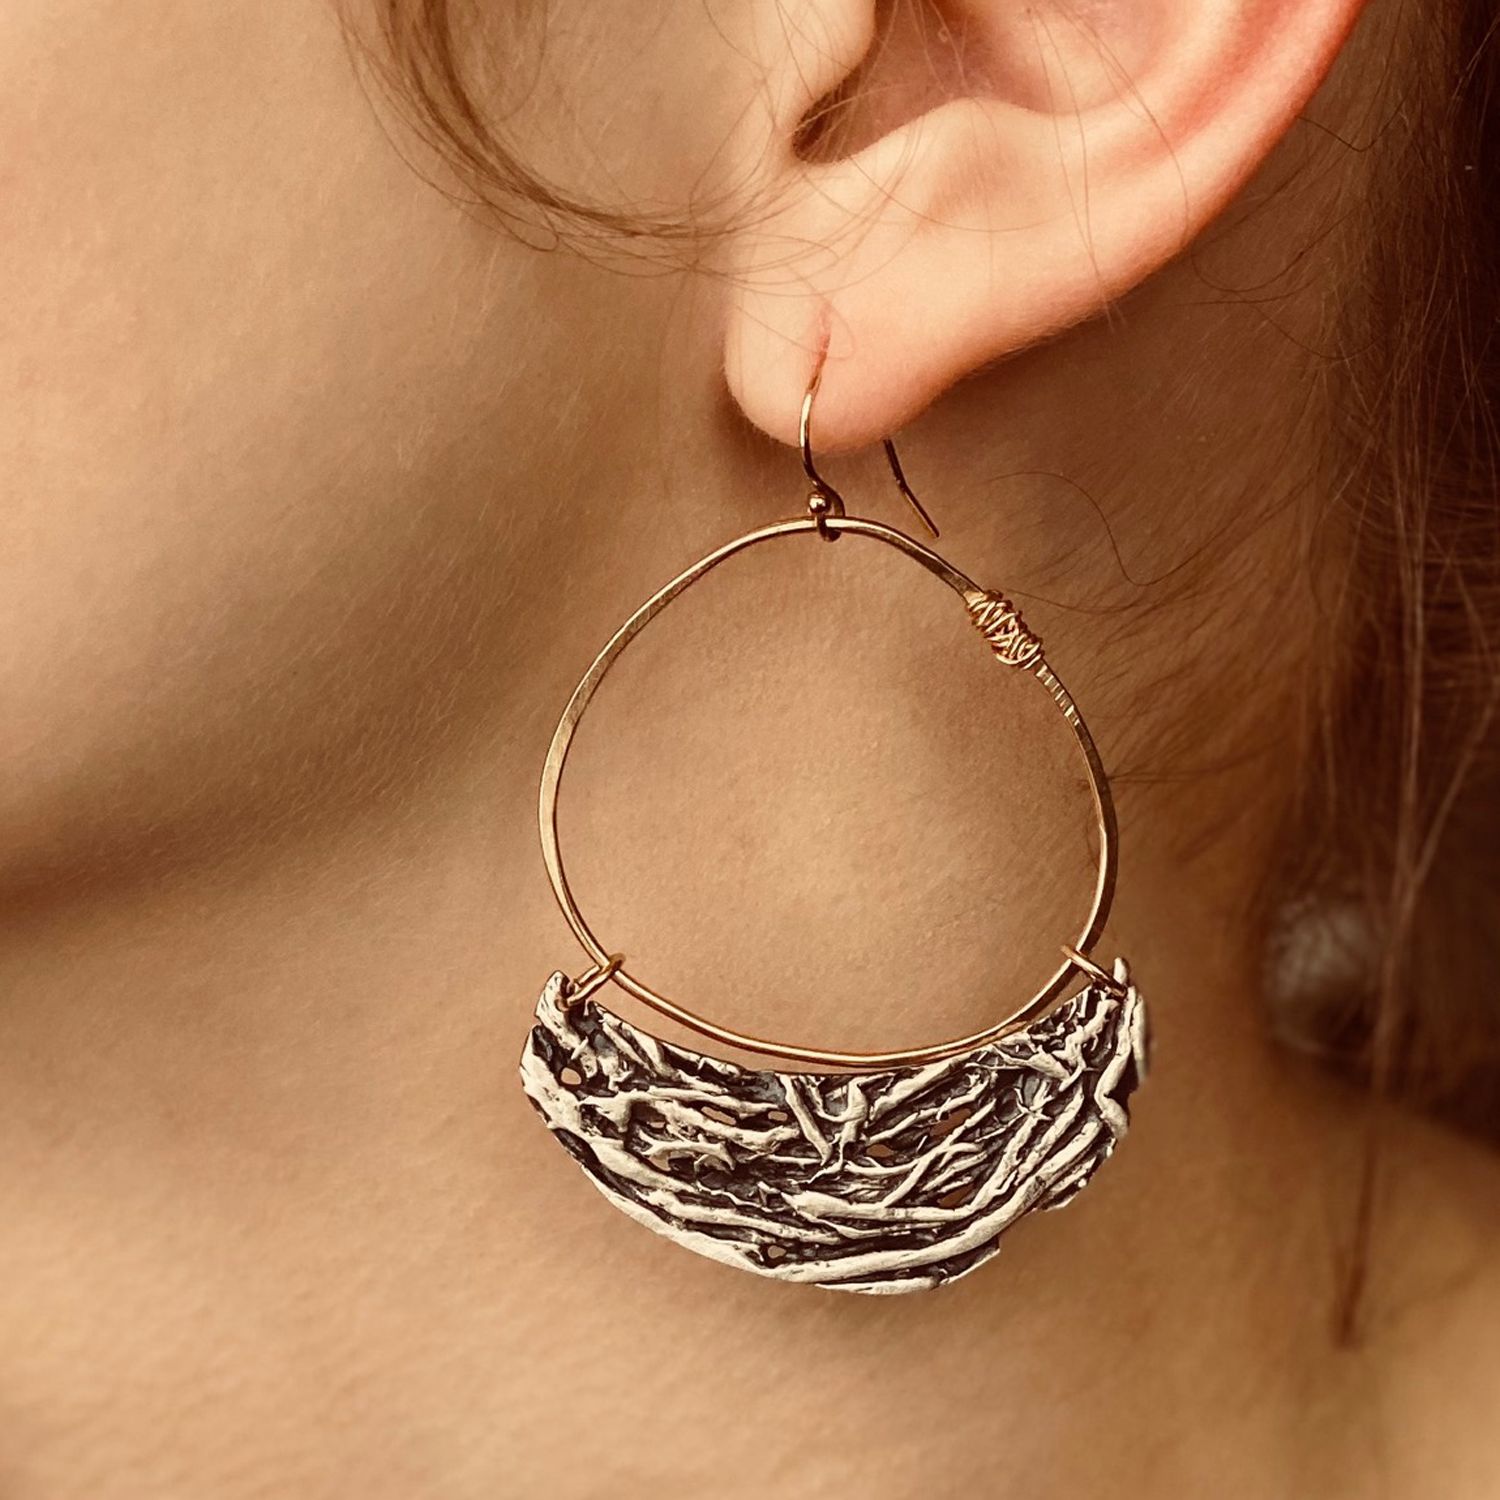 Air & Earth Design: Hover Large Earrings Product Image 1 of 1